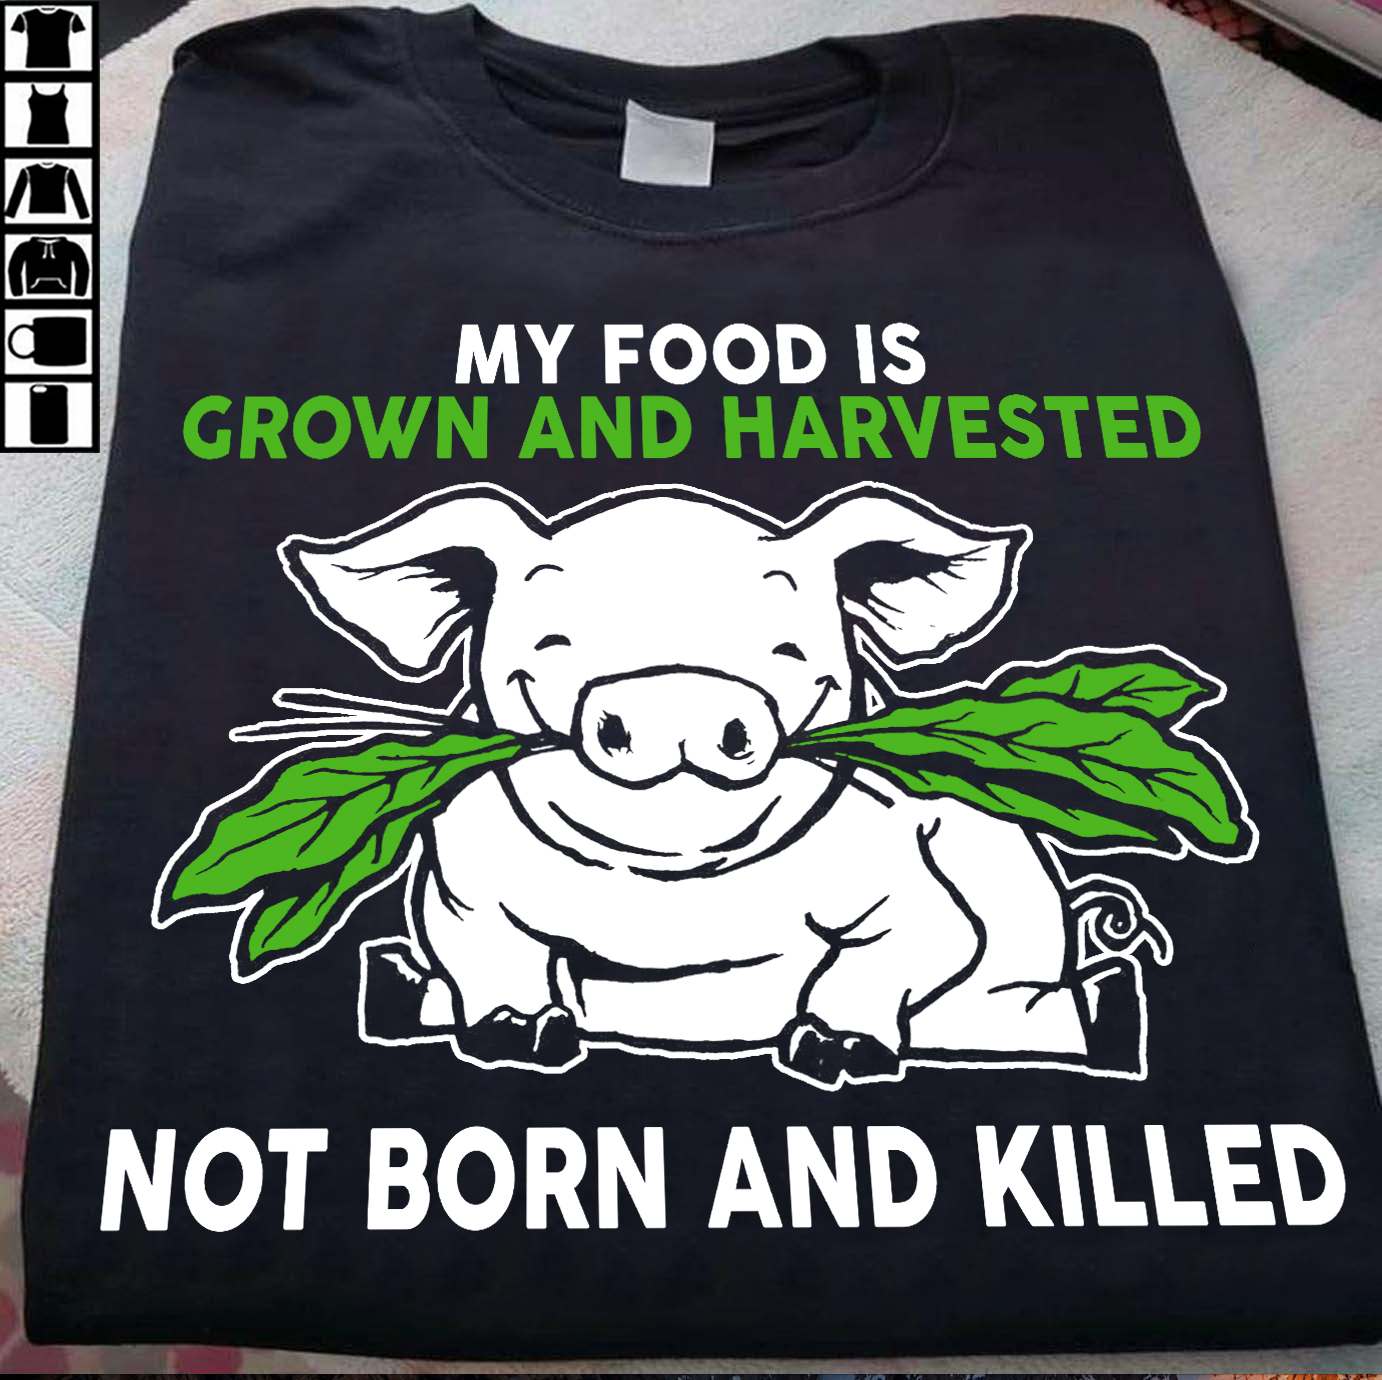 My food is grown and harvested not born and kill - No kill pig for meat